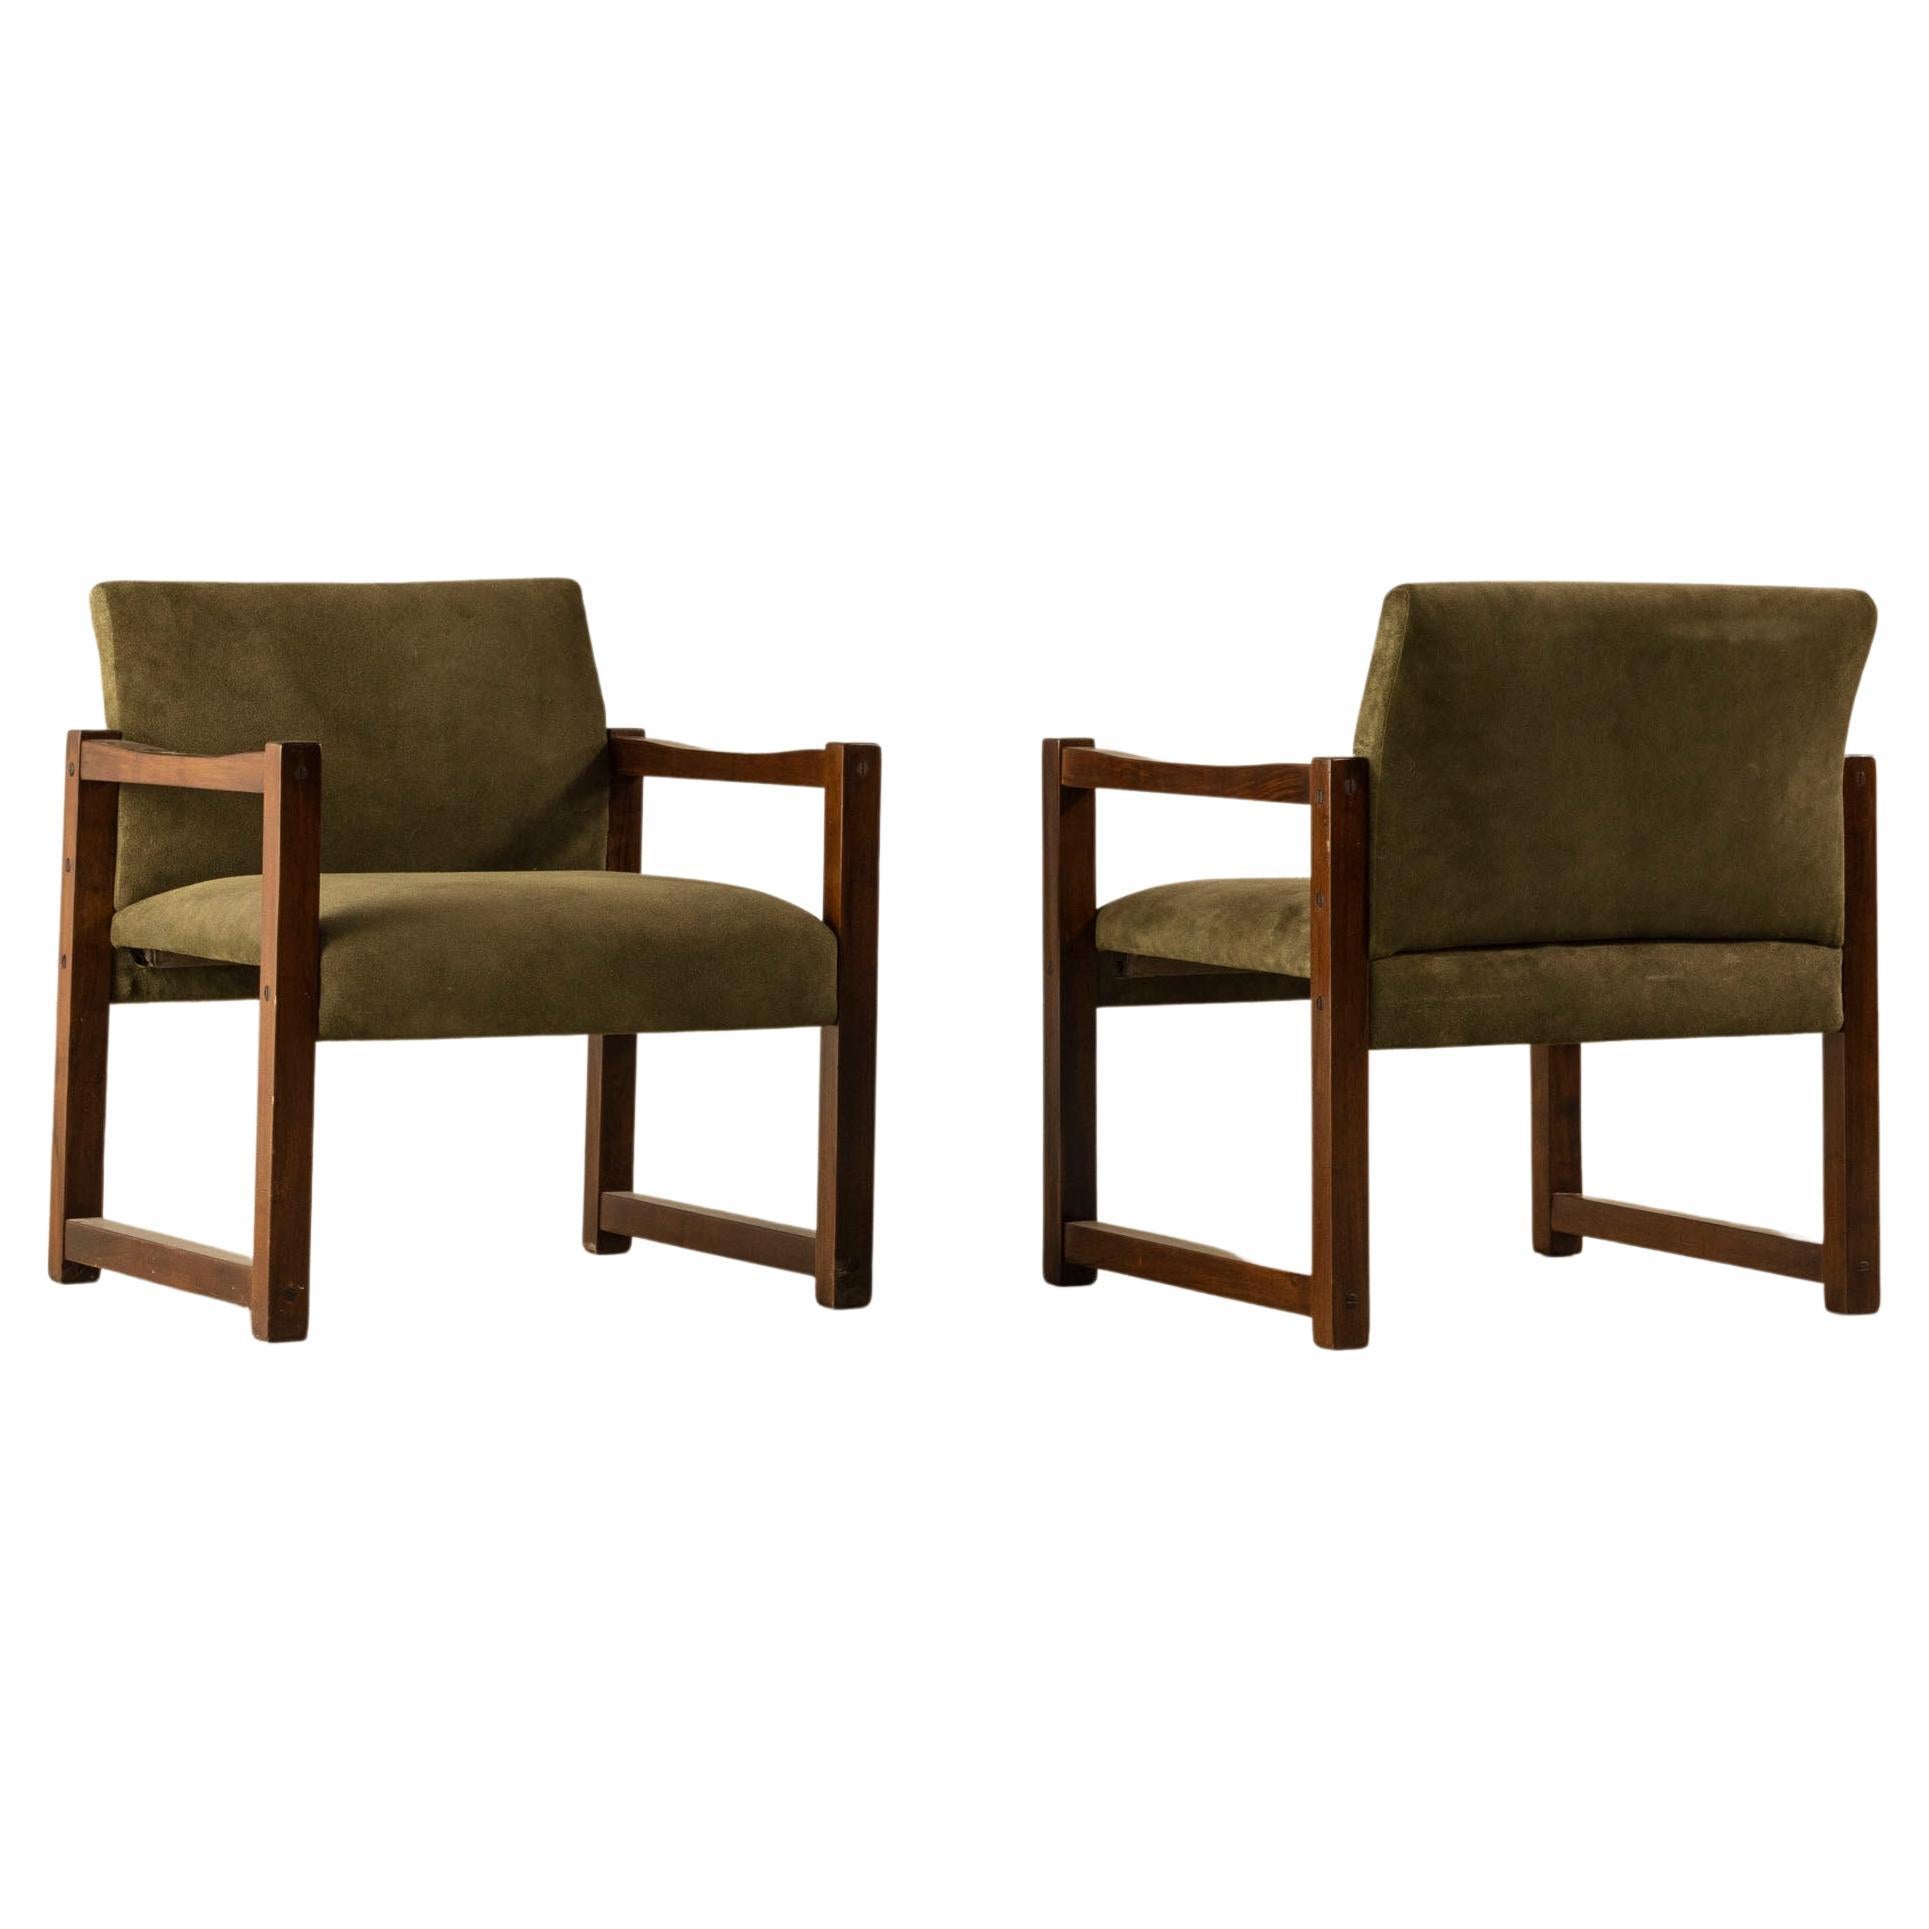 Pair of "Square" 60's Armchairs in wood and fabric, Brazilian Mid-Century Design For Sale